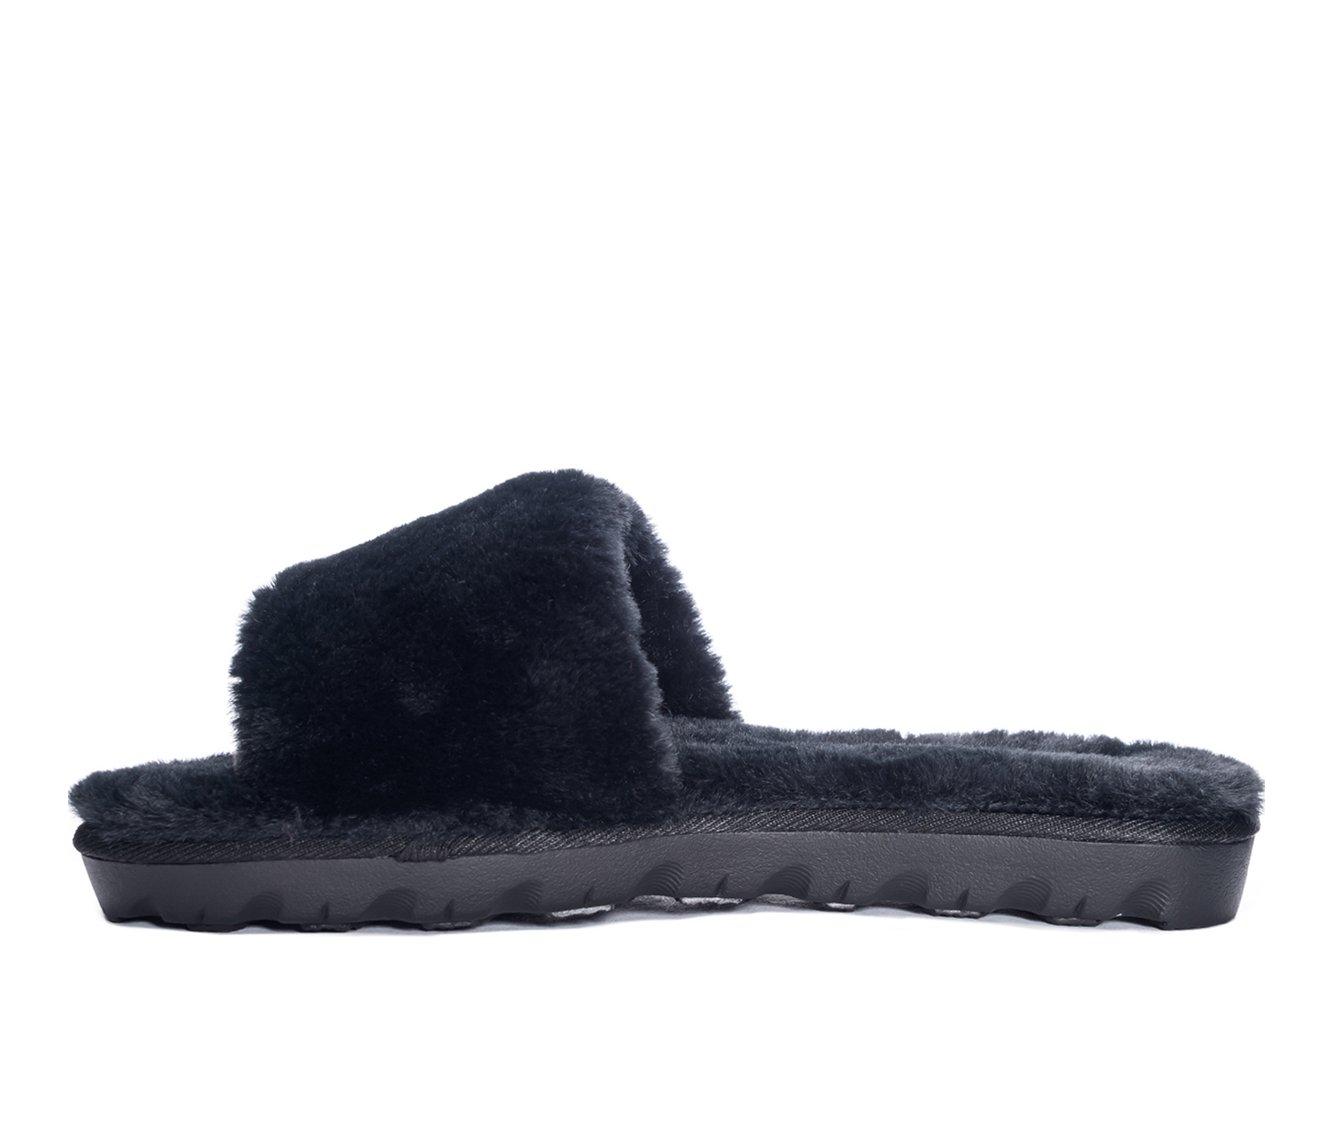 Chinese Laundry Rally Slide Slippers